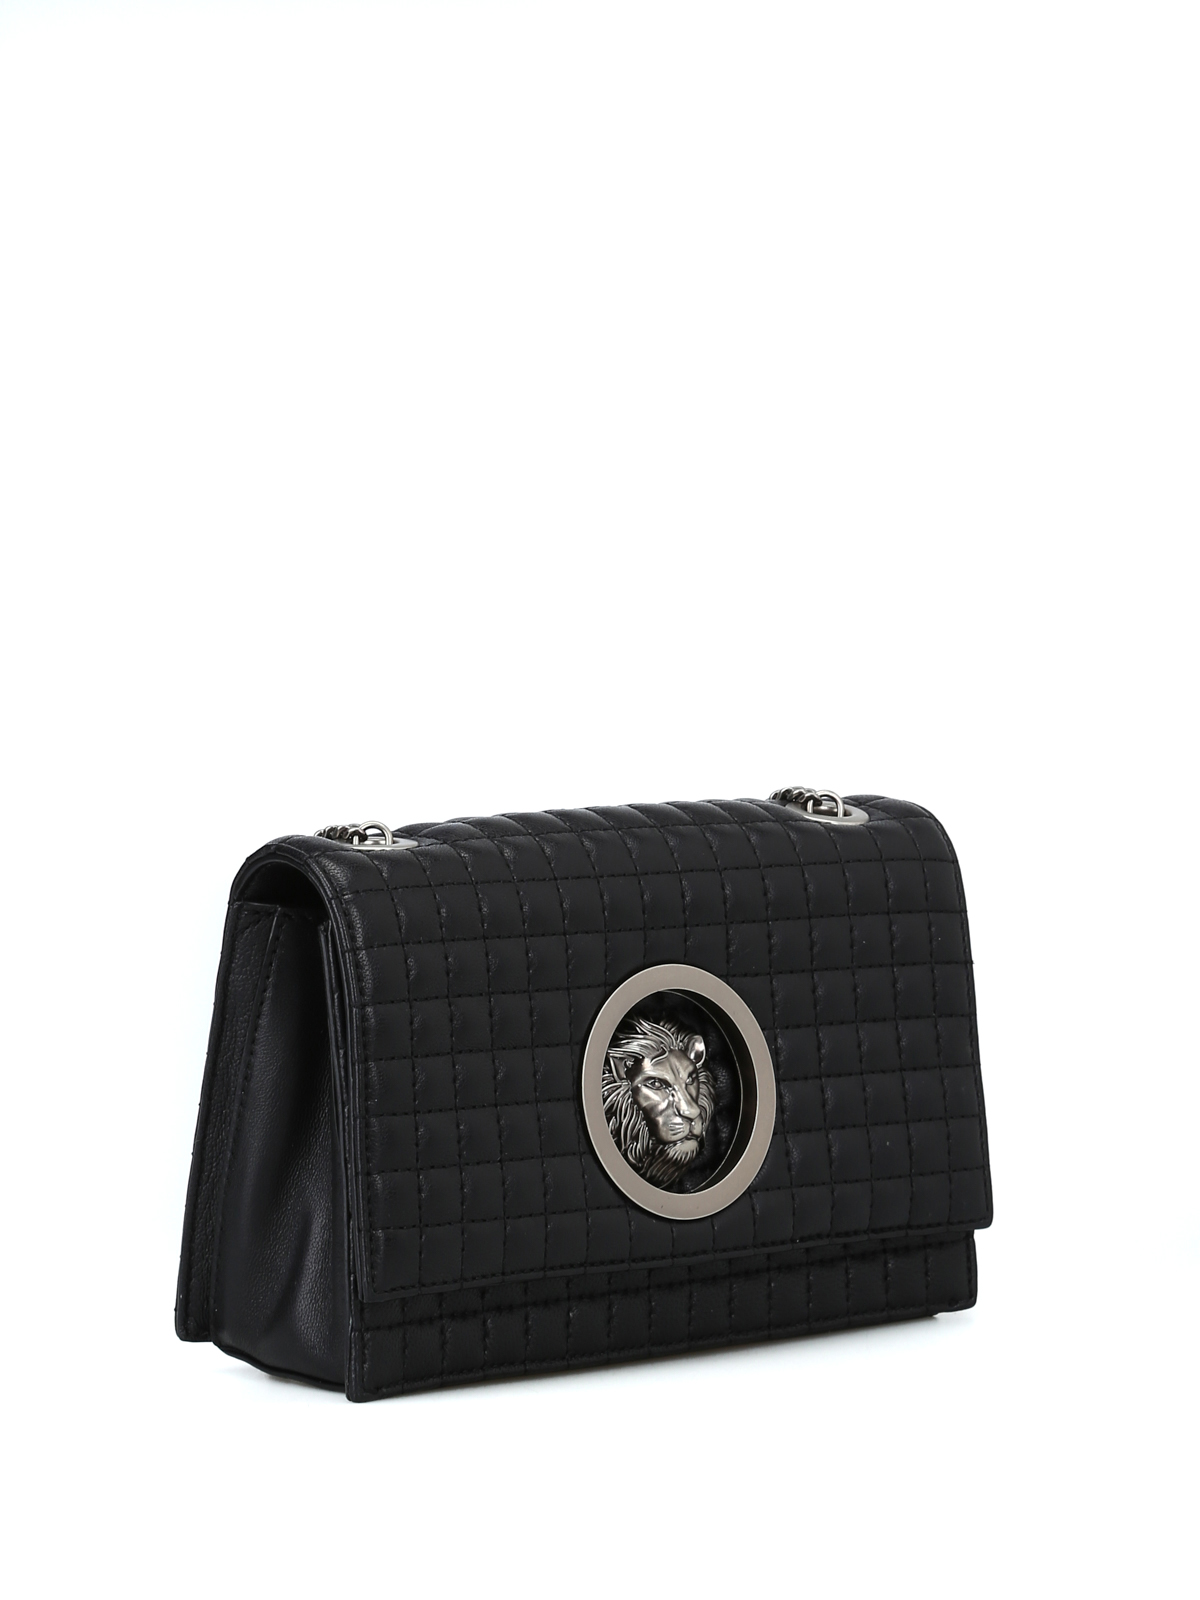 Versus Versace - Quilted leather bag 